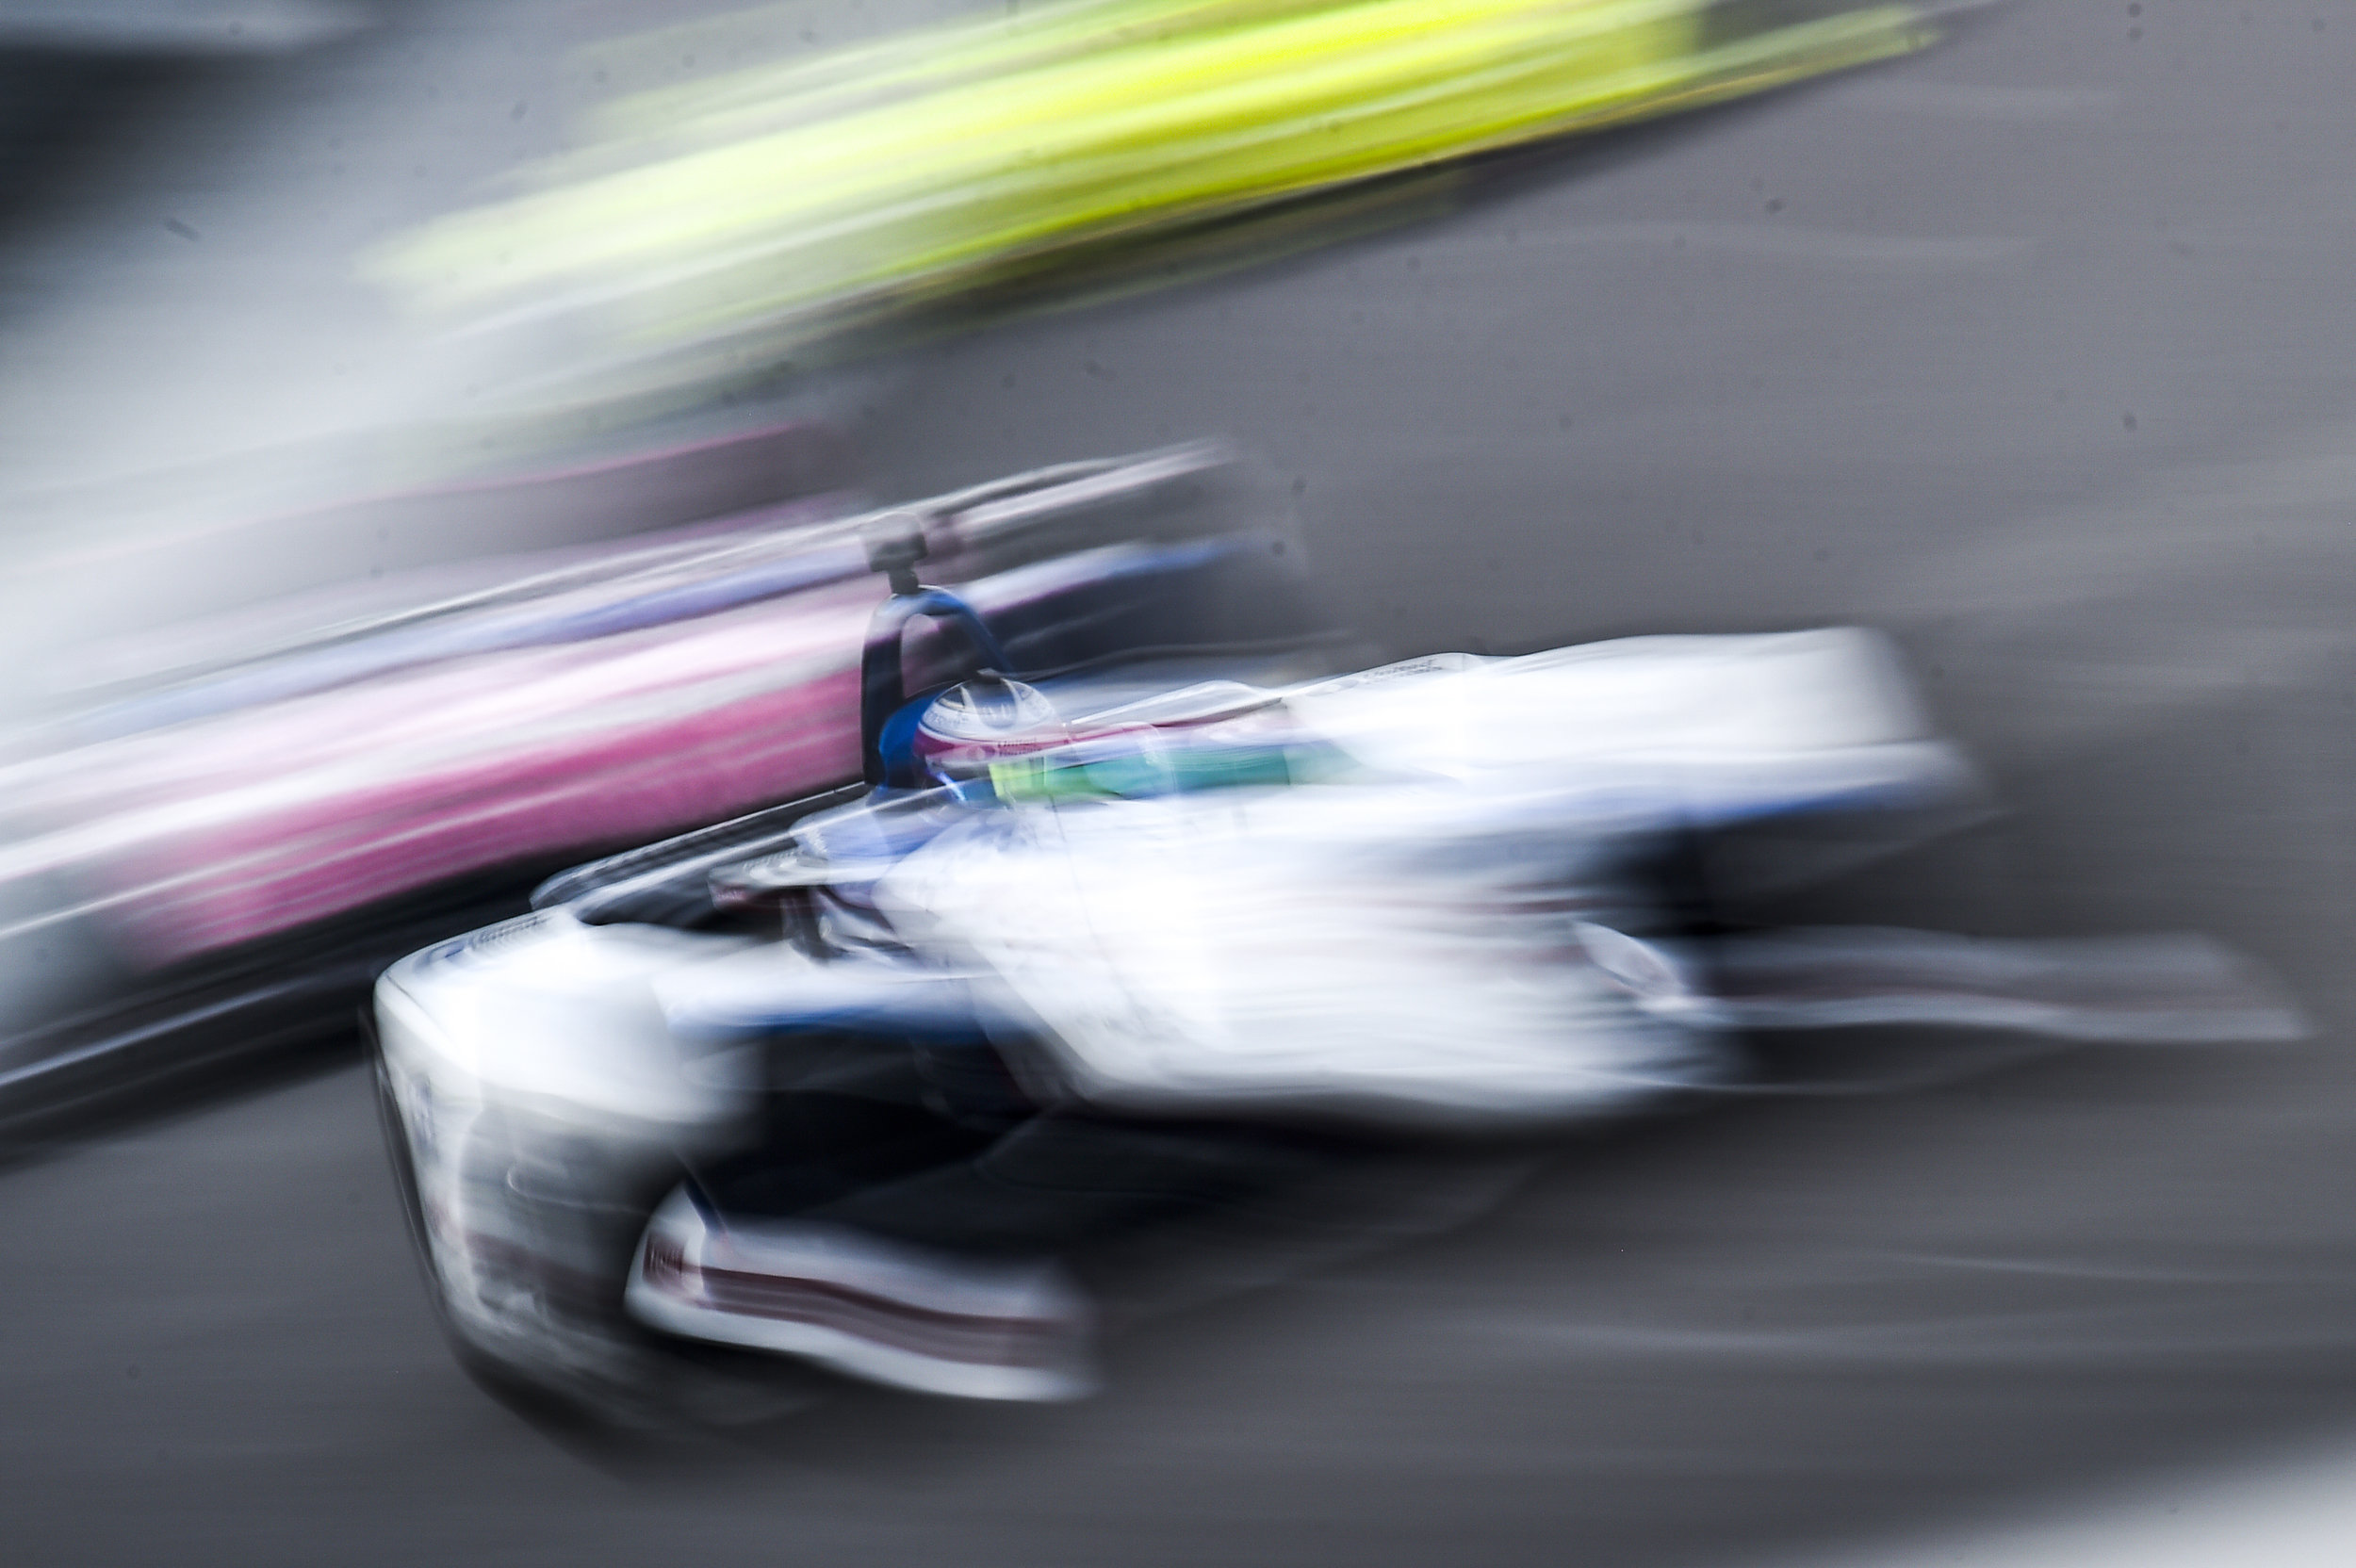  Graham Rahal blurs through turn 1 at IMS. We shoot so many photos in May. It’s fun to play with settings. 